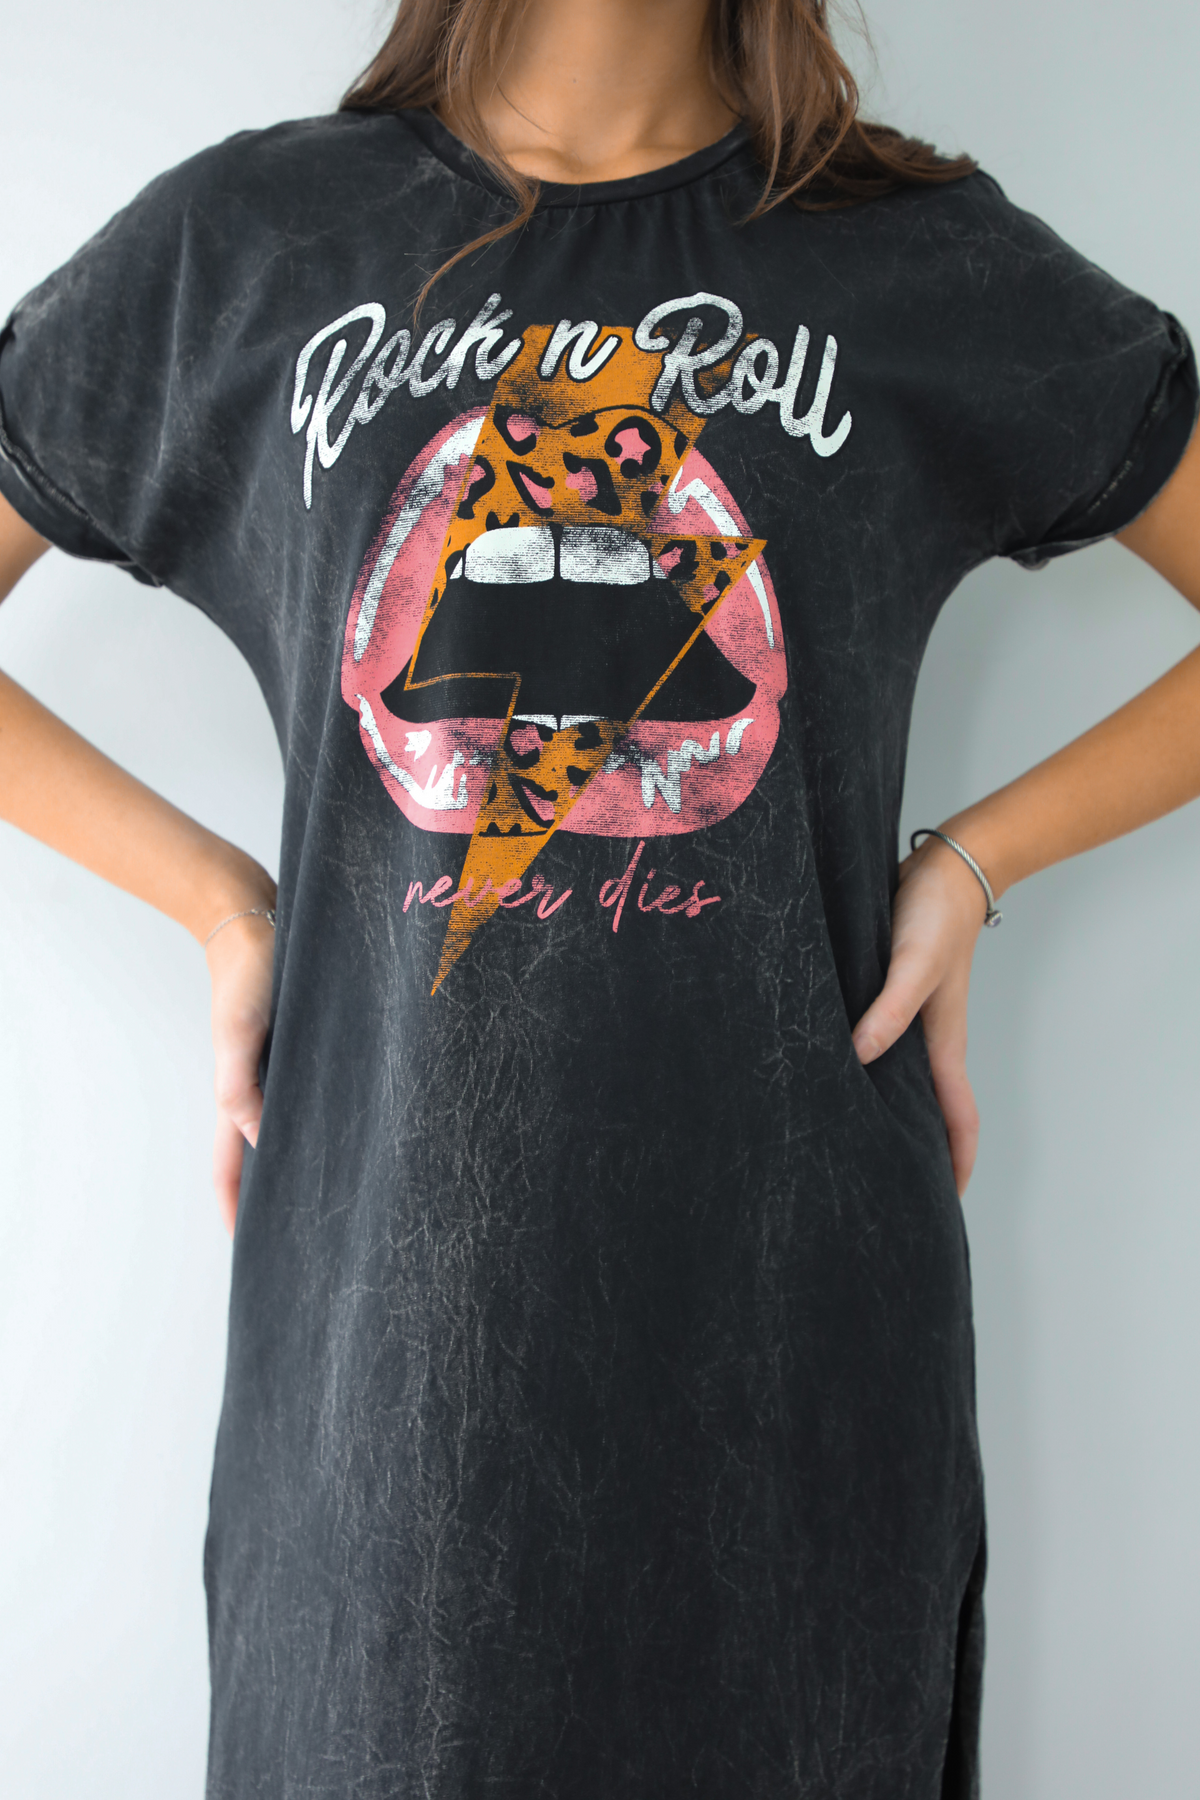 Rock And Roll Never Dies Dress: Black/Multi